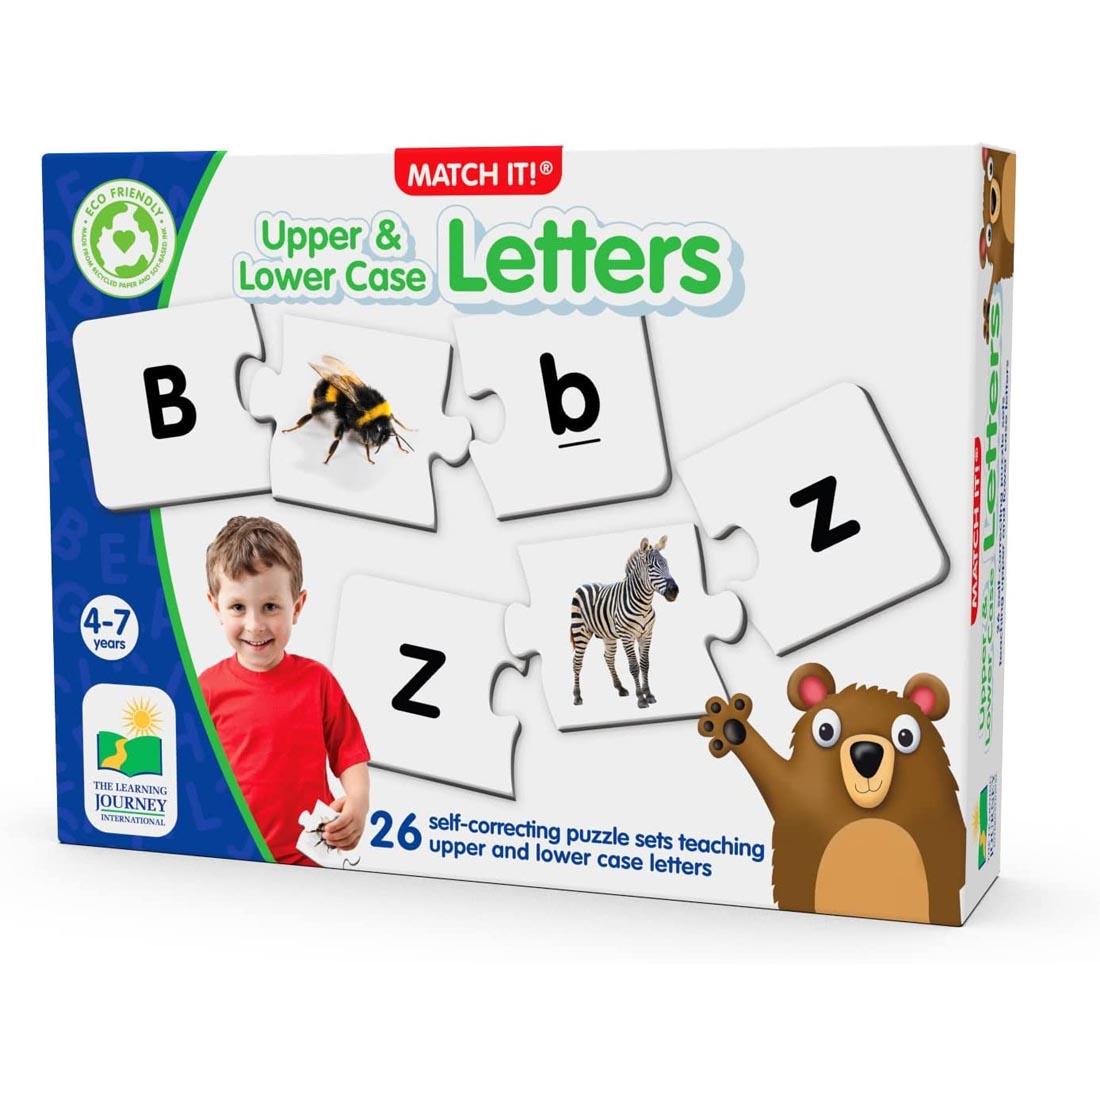 Upper & Lower Case Letters Match It! By The Learning Journey